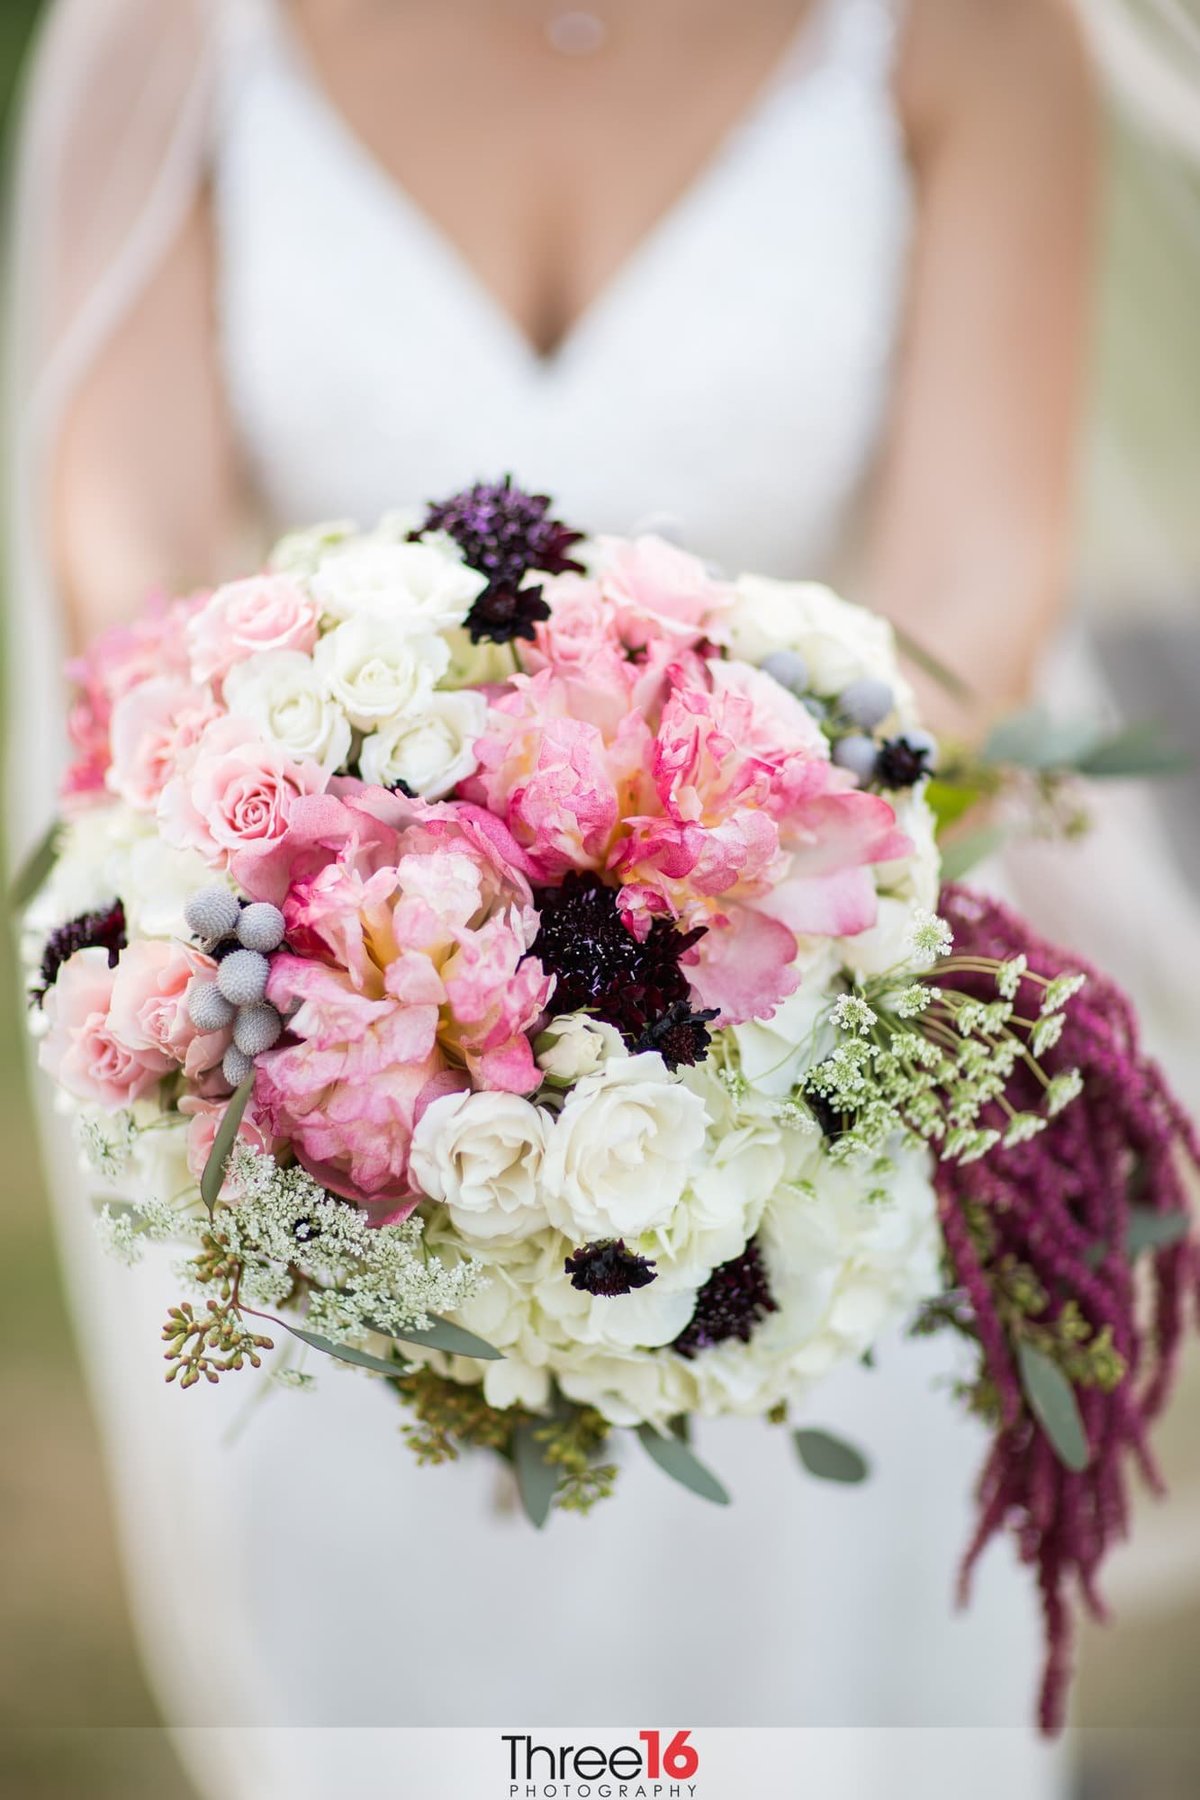 Bride holds out her bouquet of flowers at the wedding photographer